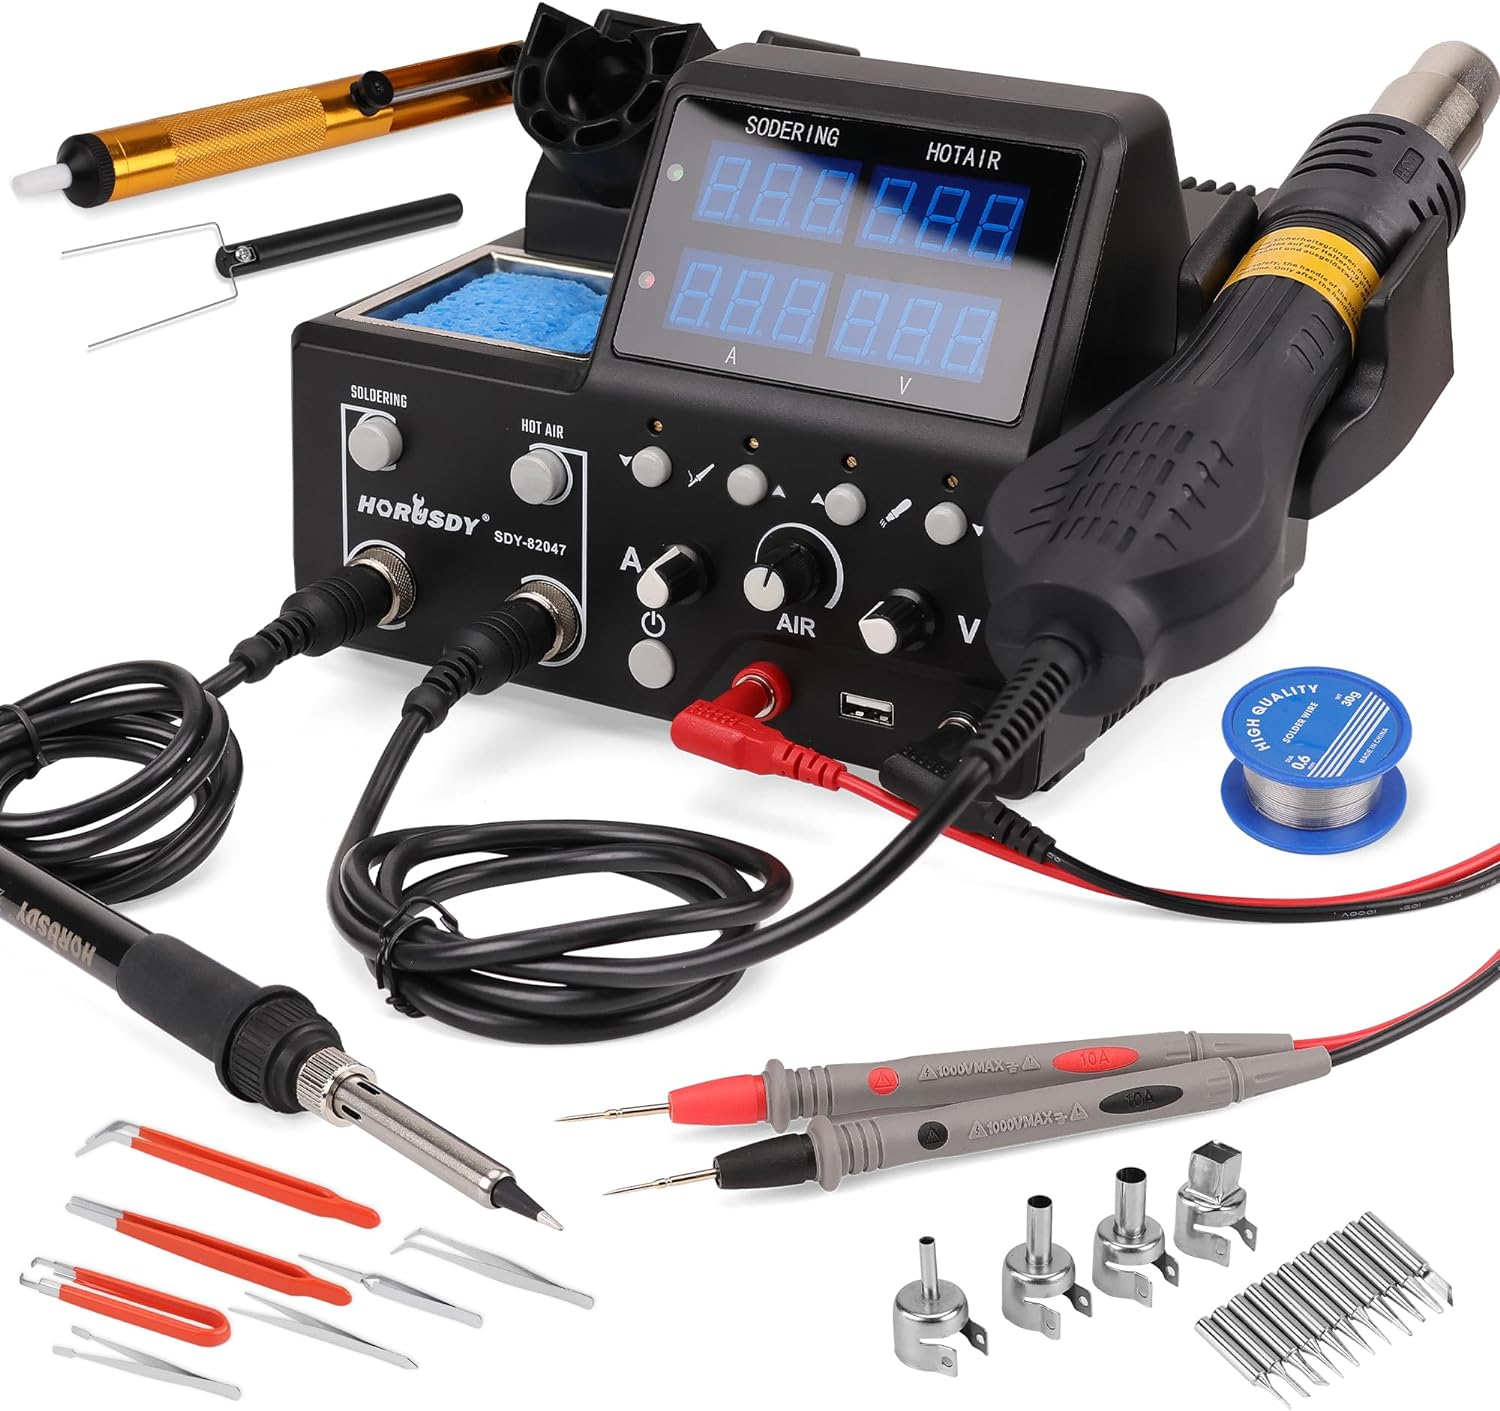 Comprehensive 3-in-1 Soldering and Rework Station with Digital Control, Various Accessories Included